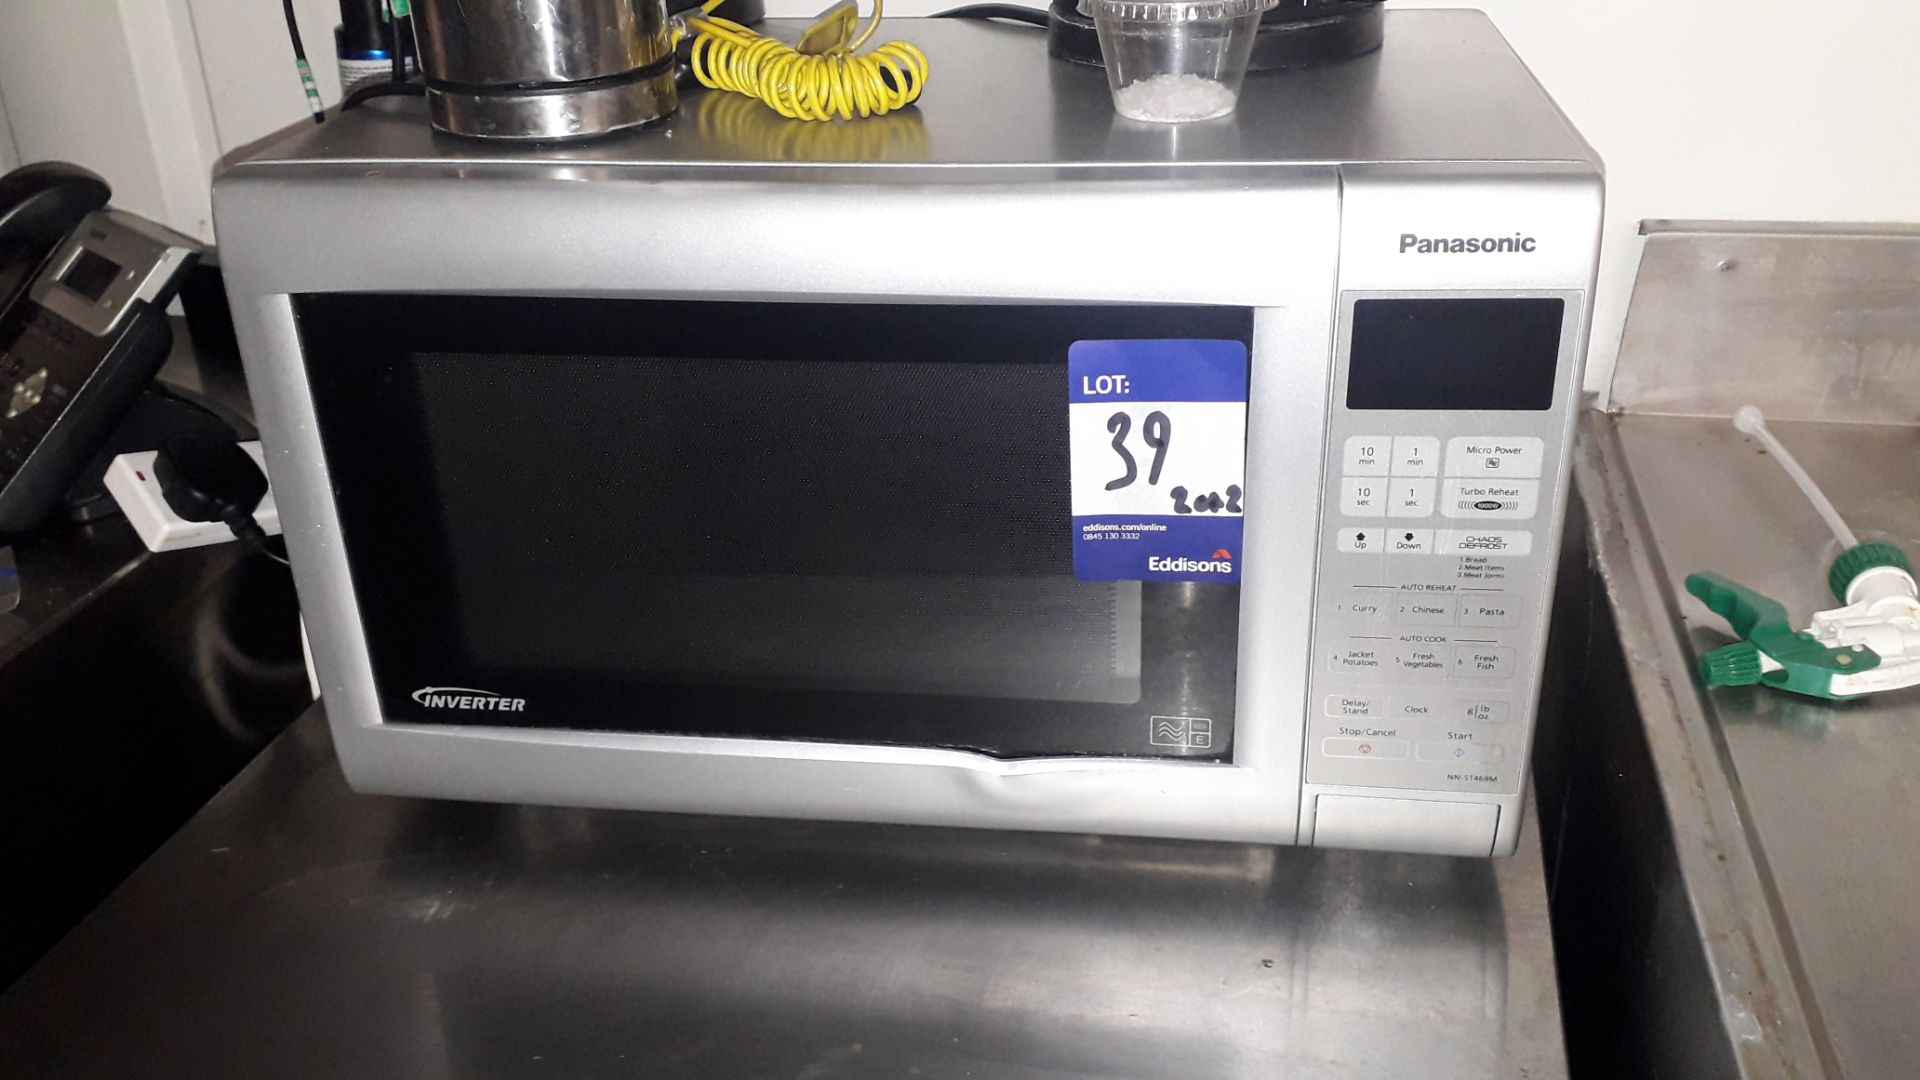 Russell Hobbs Microwave Oven & Panasonic Microwave Oven – Located 85 Scoresby Street, London, SE1 - Image 2 of 2